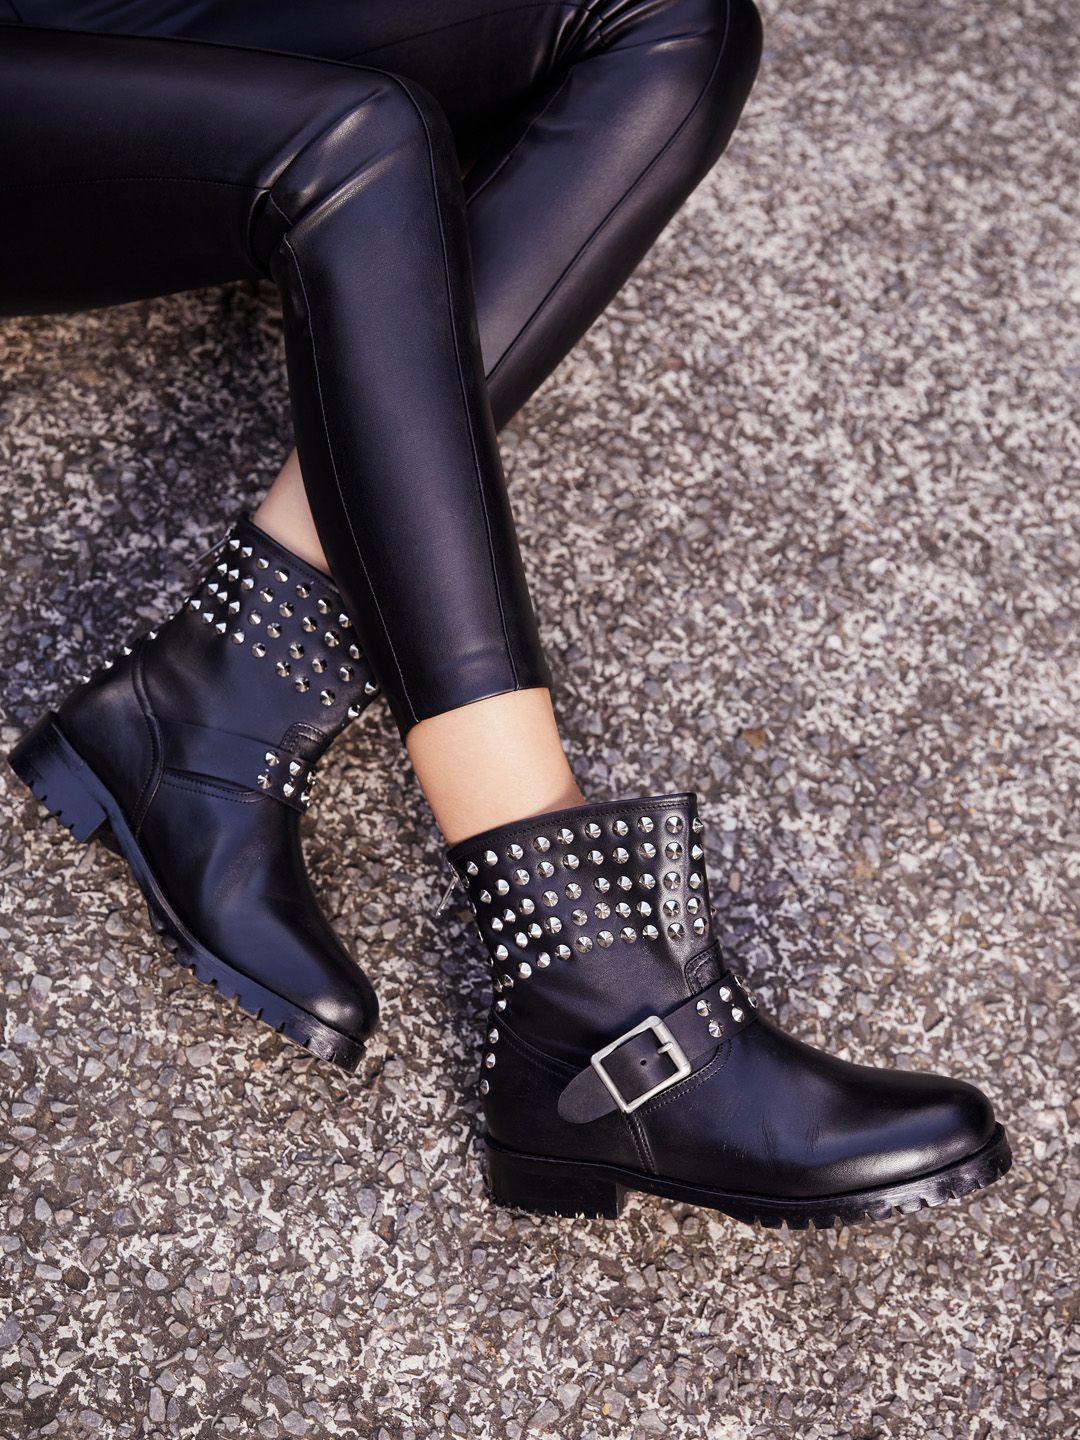 Saint G Women Black & Silver-Toned Metal Studded Black Leather Biker Boots Price in India